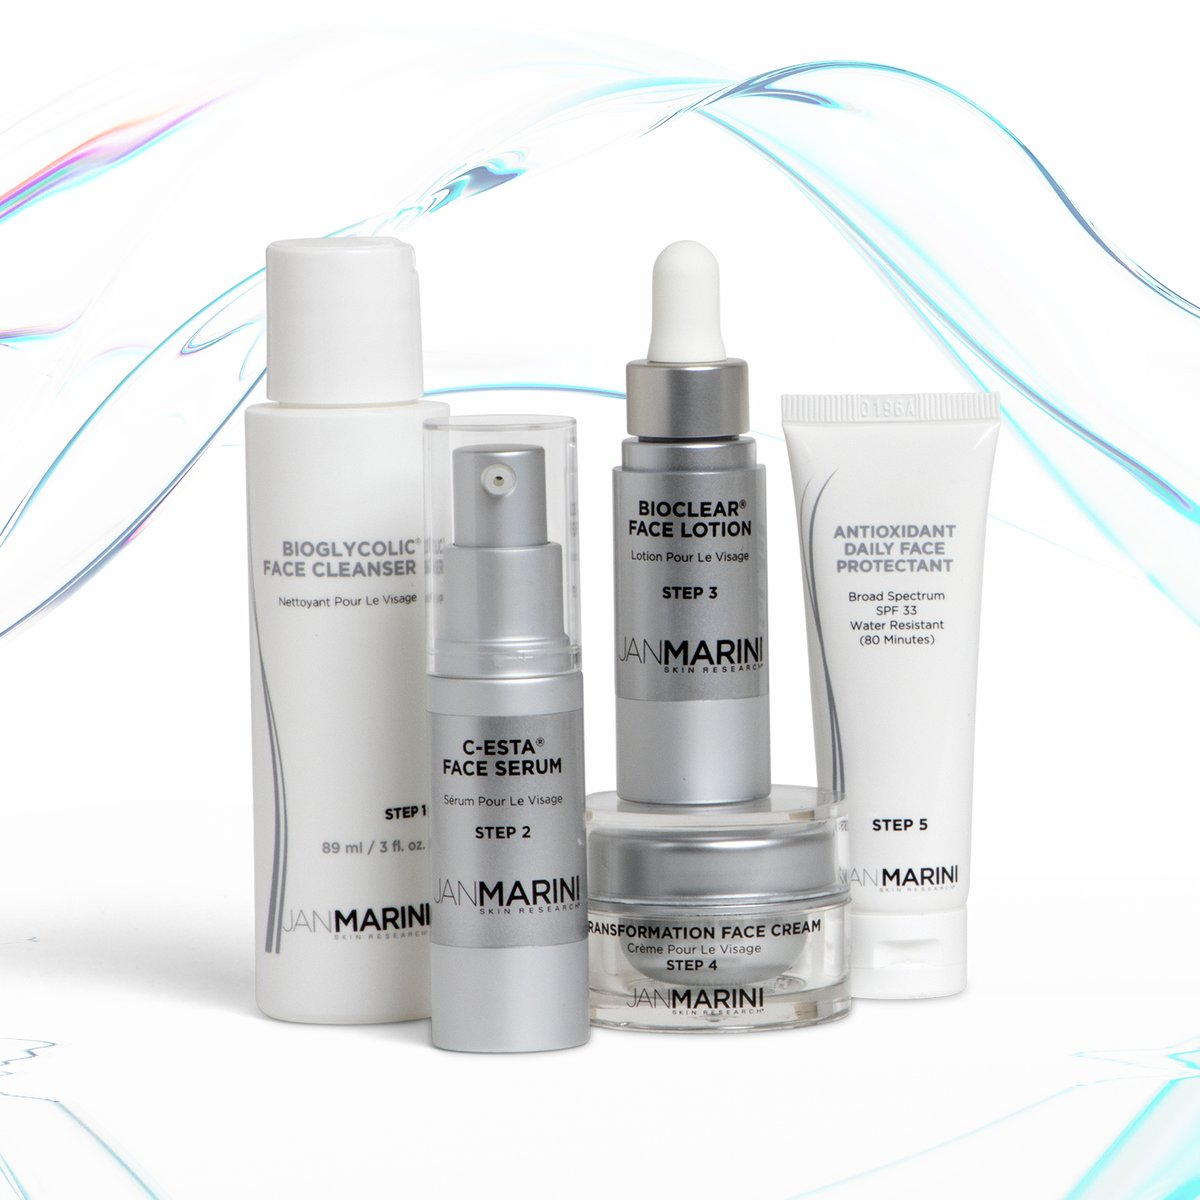 Jan Marini Starter Skin Care Management System is the perfect travel-size System! Discover how to create healthier, younger-looking skin #skincare #Skin

Available now at: clinicalskincare.co.uk/product/jan-ma…